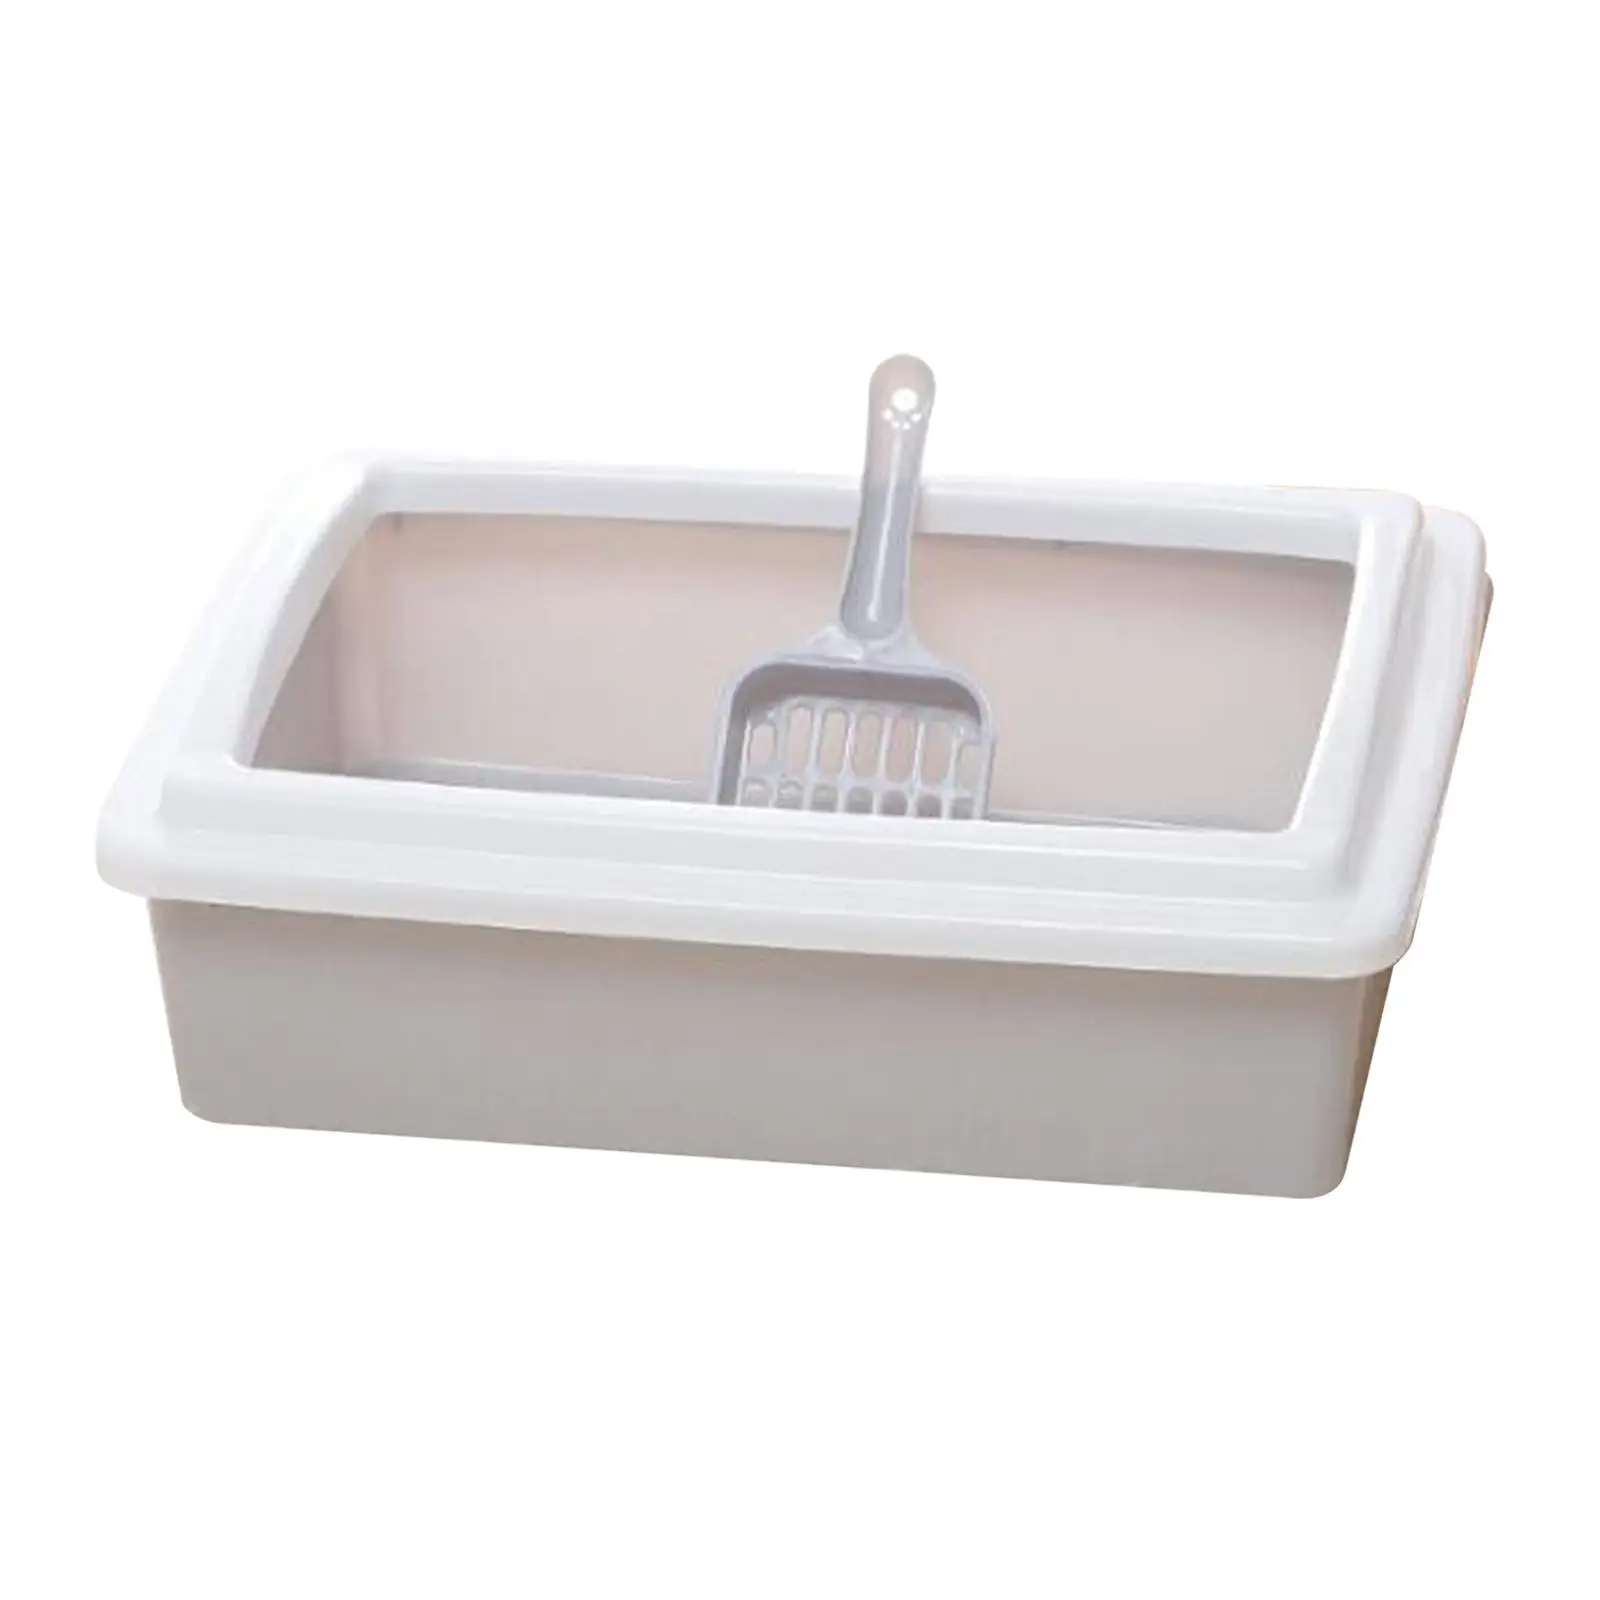 Cat Litter Tray Potty Pet Toilet Deep Loo with Spoon Open Top Cat Easy to Clean for Bunny Small Animals Small and Medium Cats